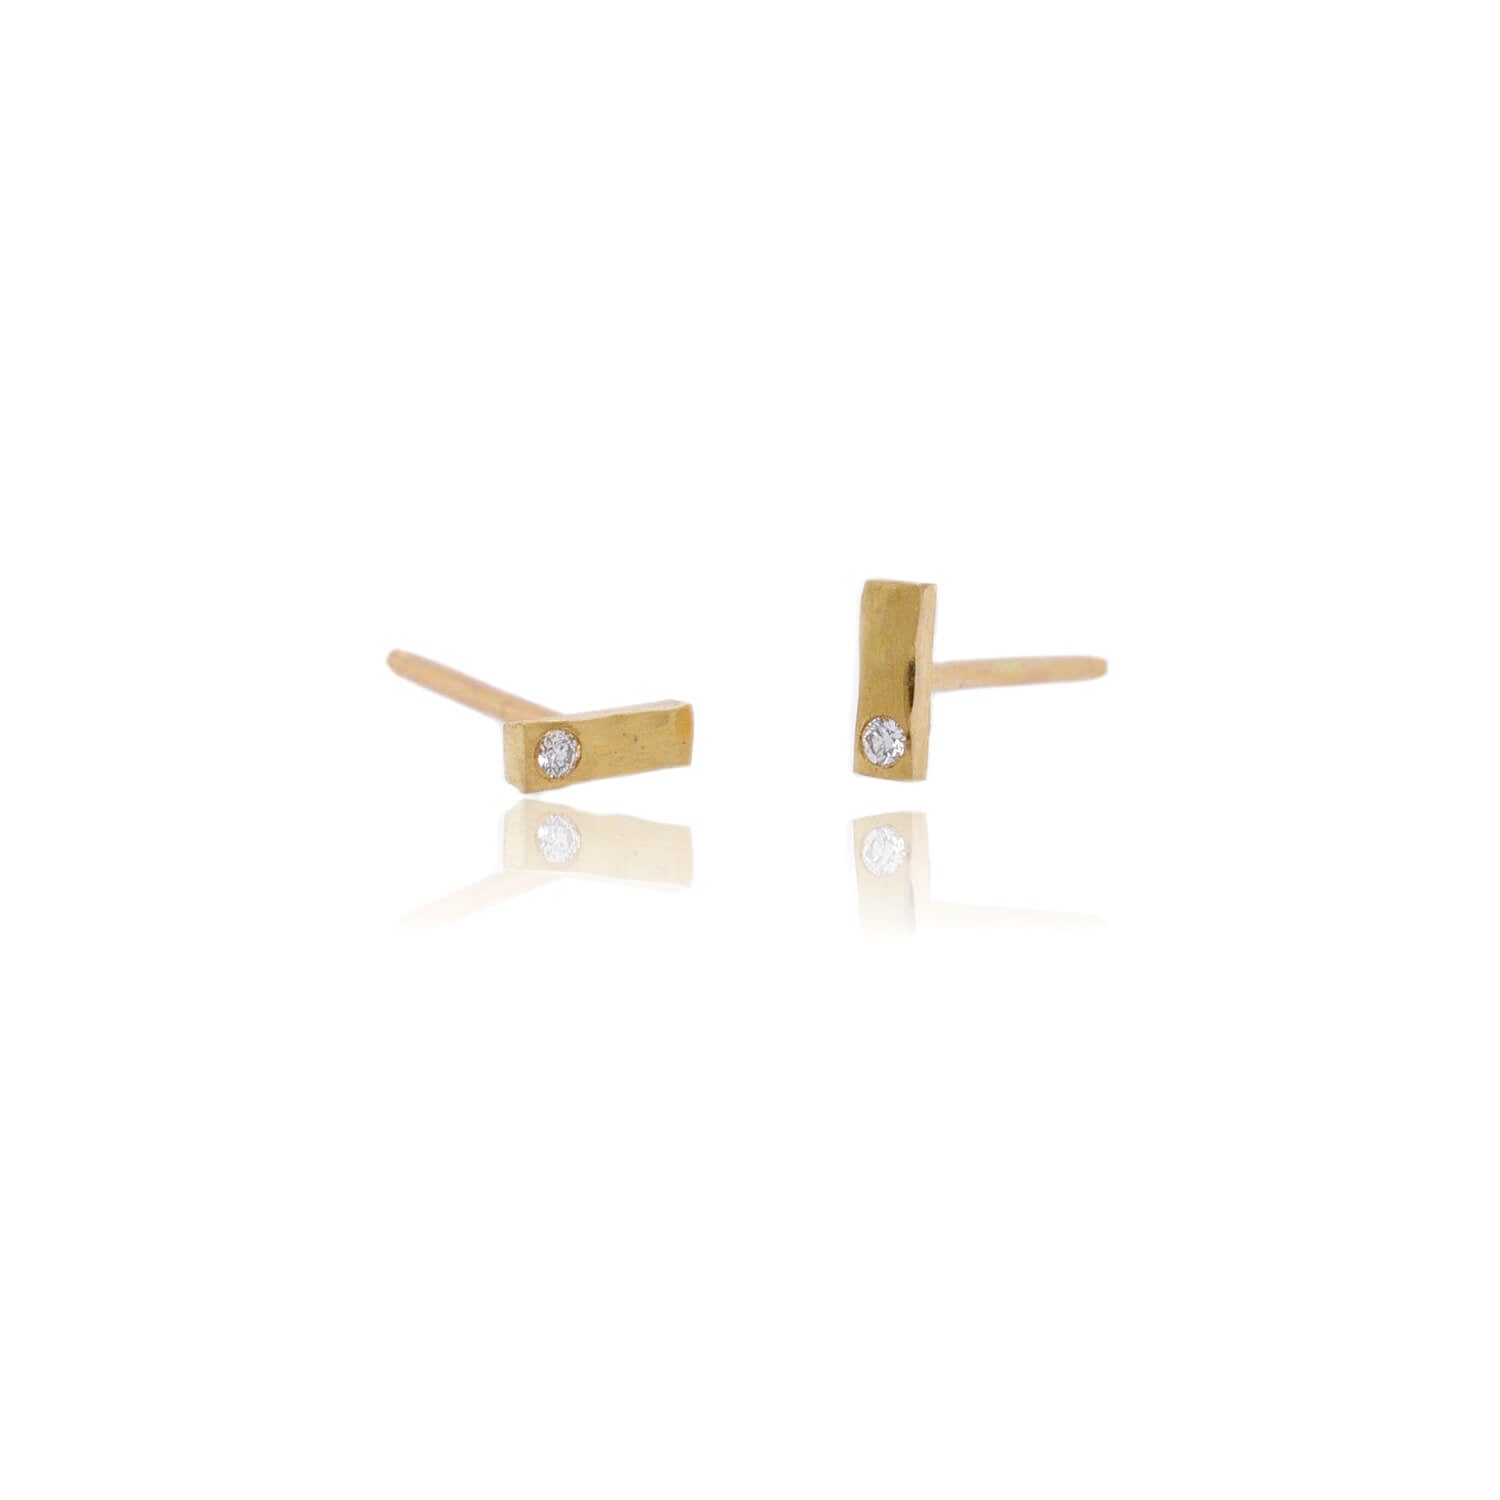 Bar Studs in Hammered 18k Yellow Gold with Diamond Accents